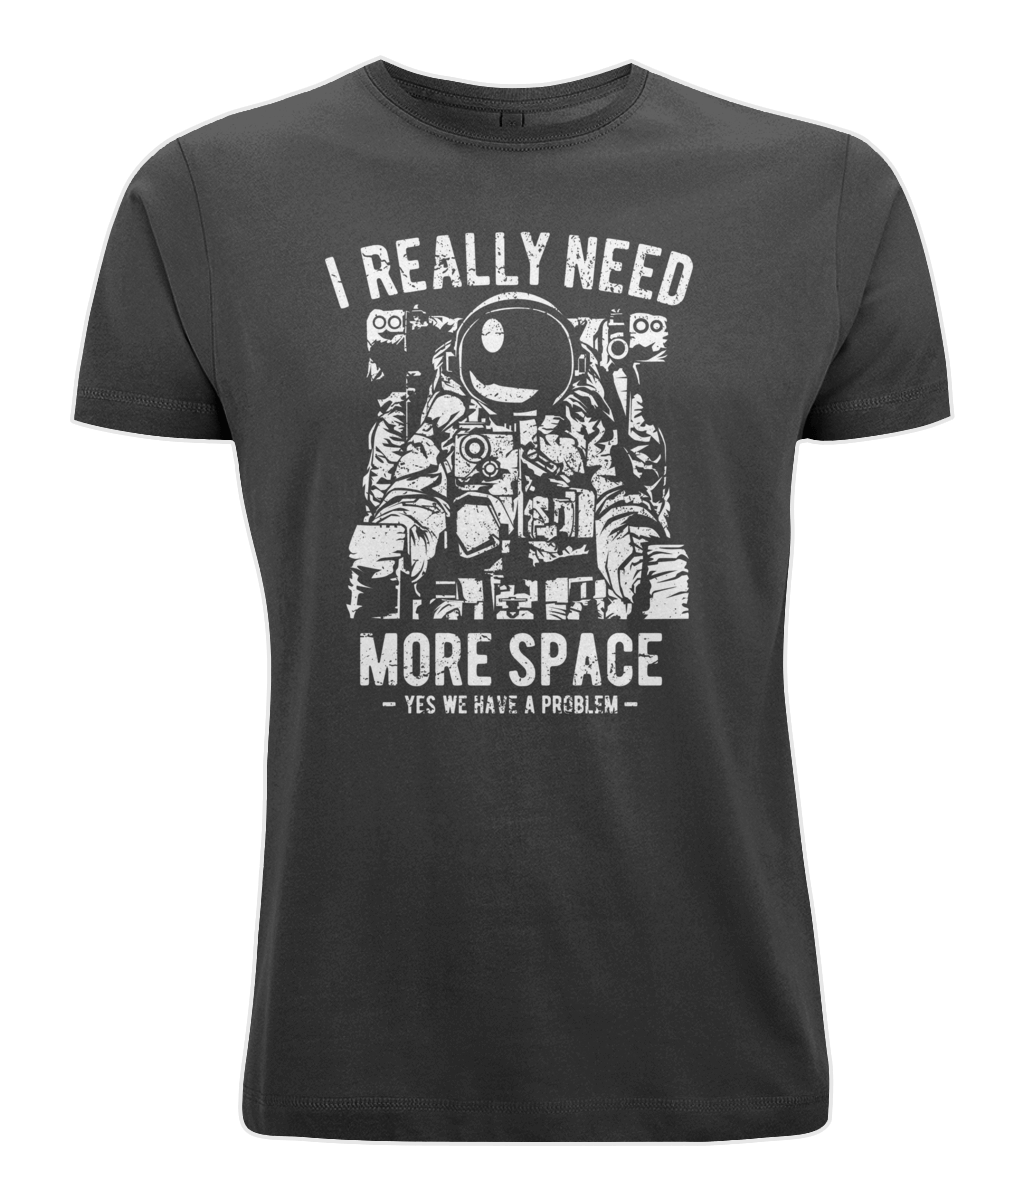 I really need more space t-shirt